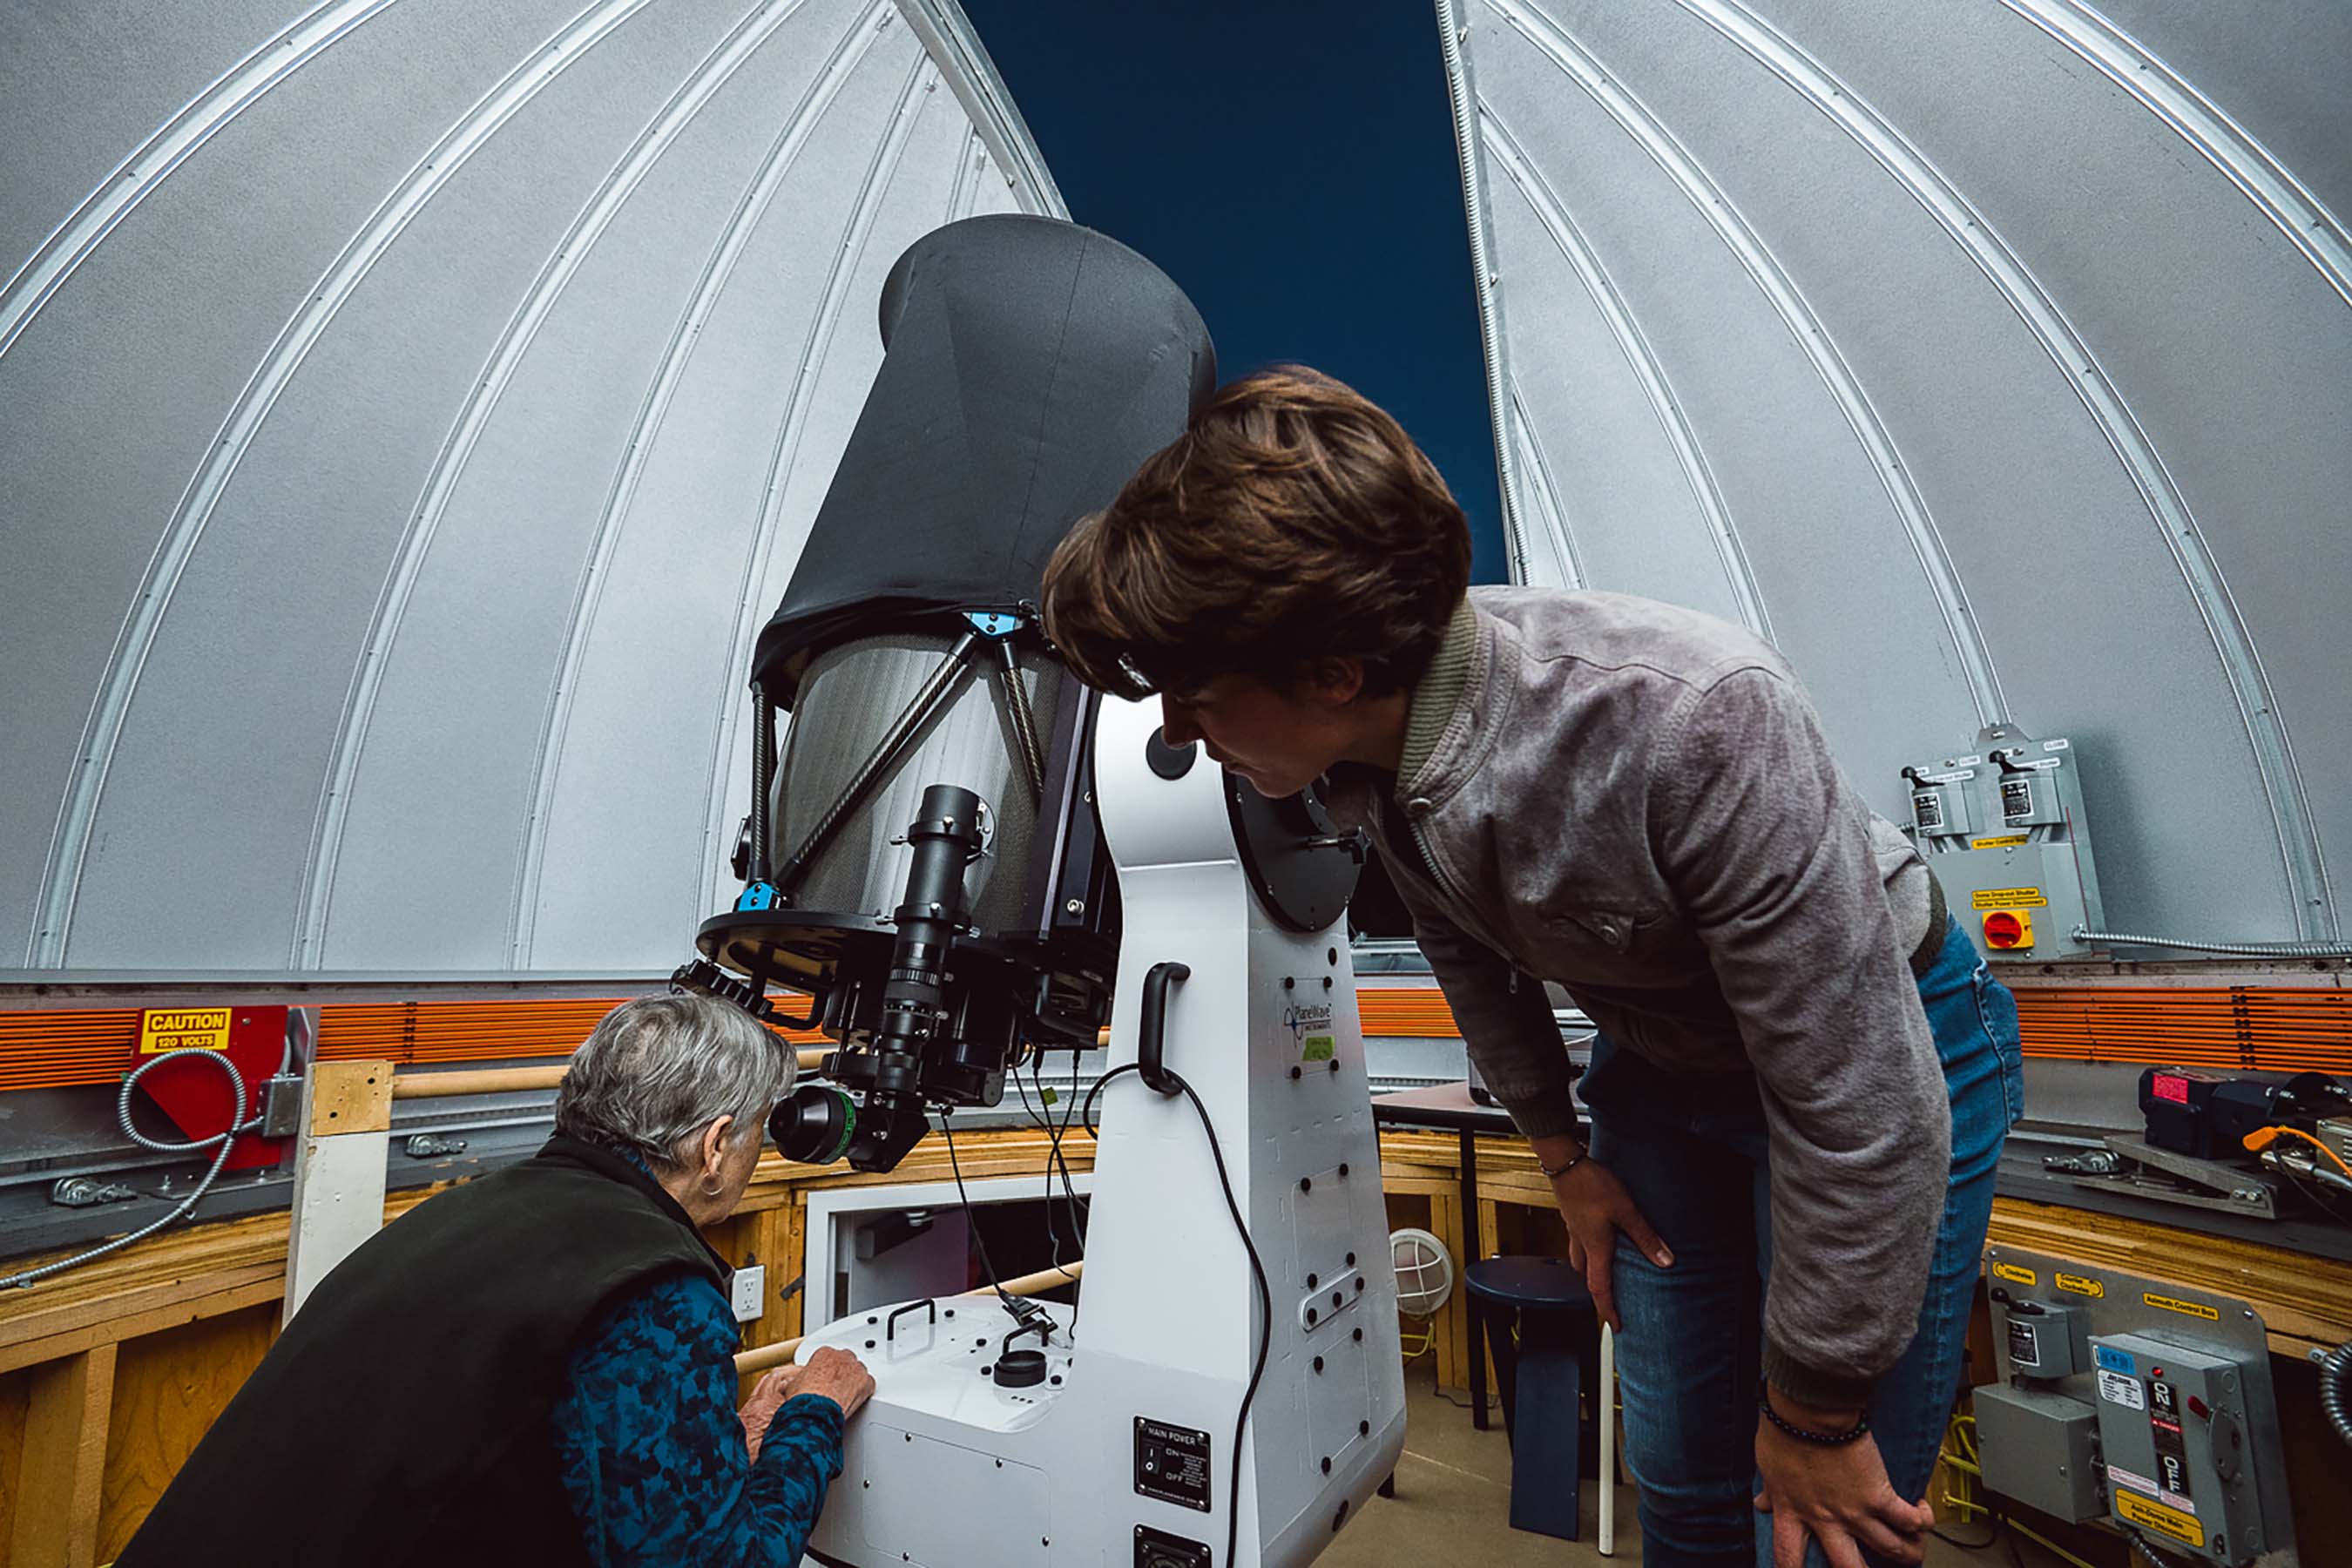 People touring the Hesje Observatory at Miquelon Lake